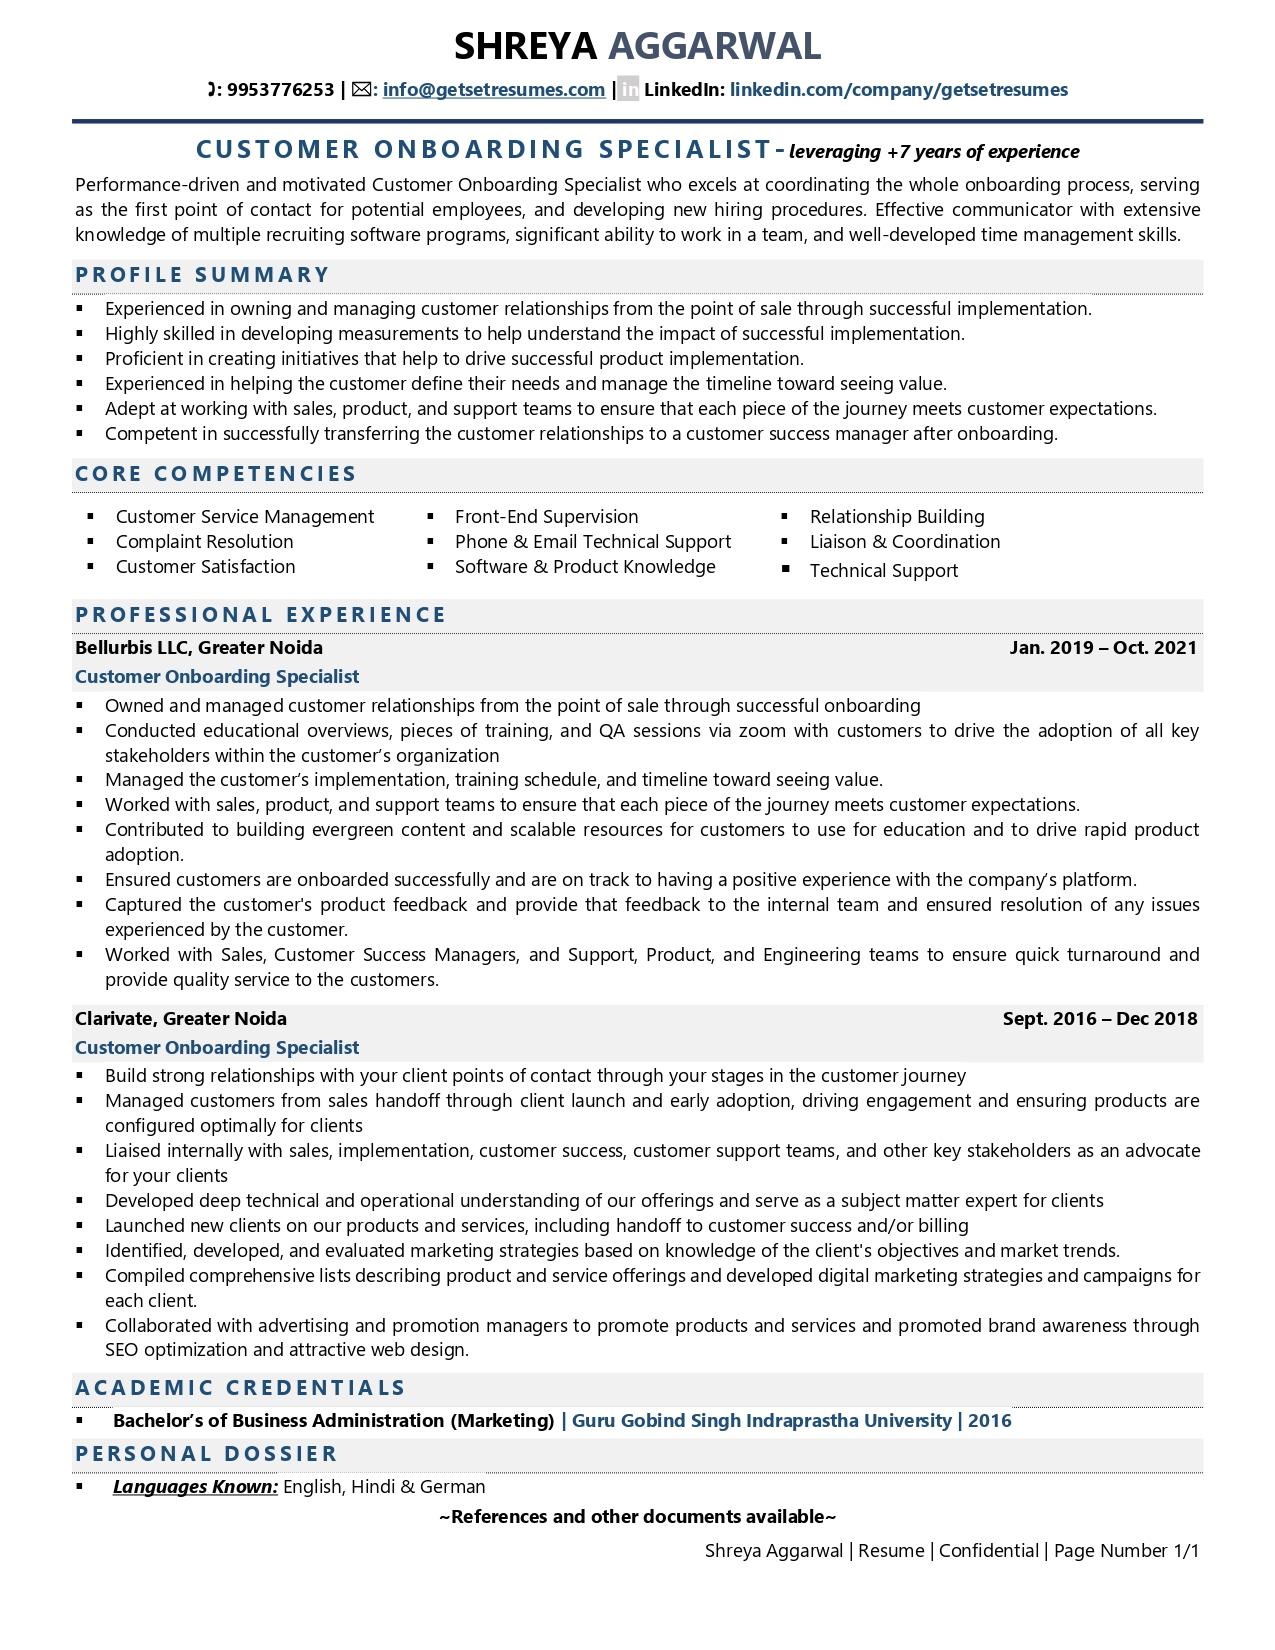 Customer Onboarding Specialist - Resume Example & Template